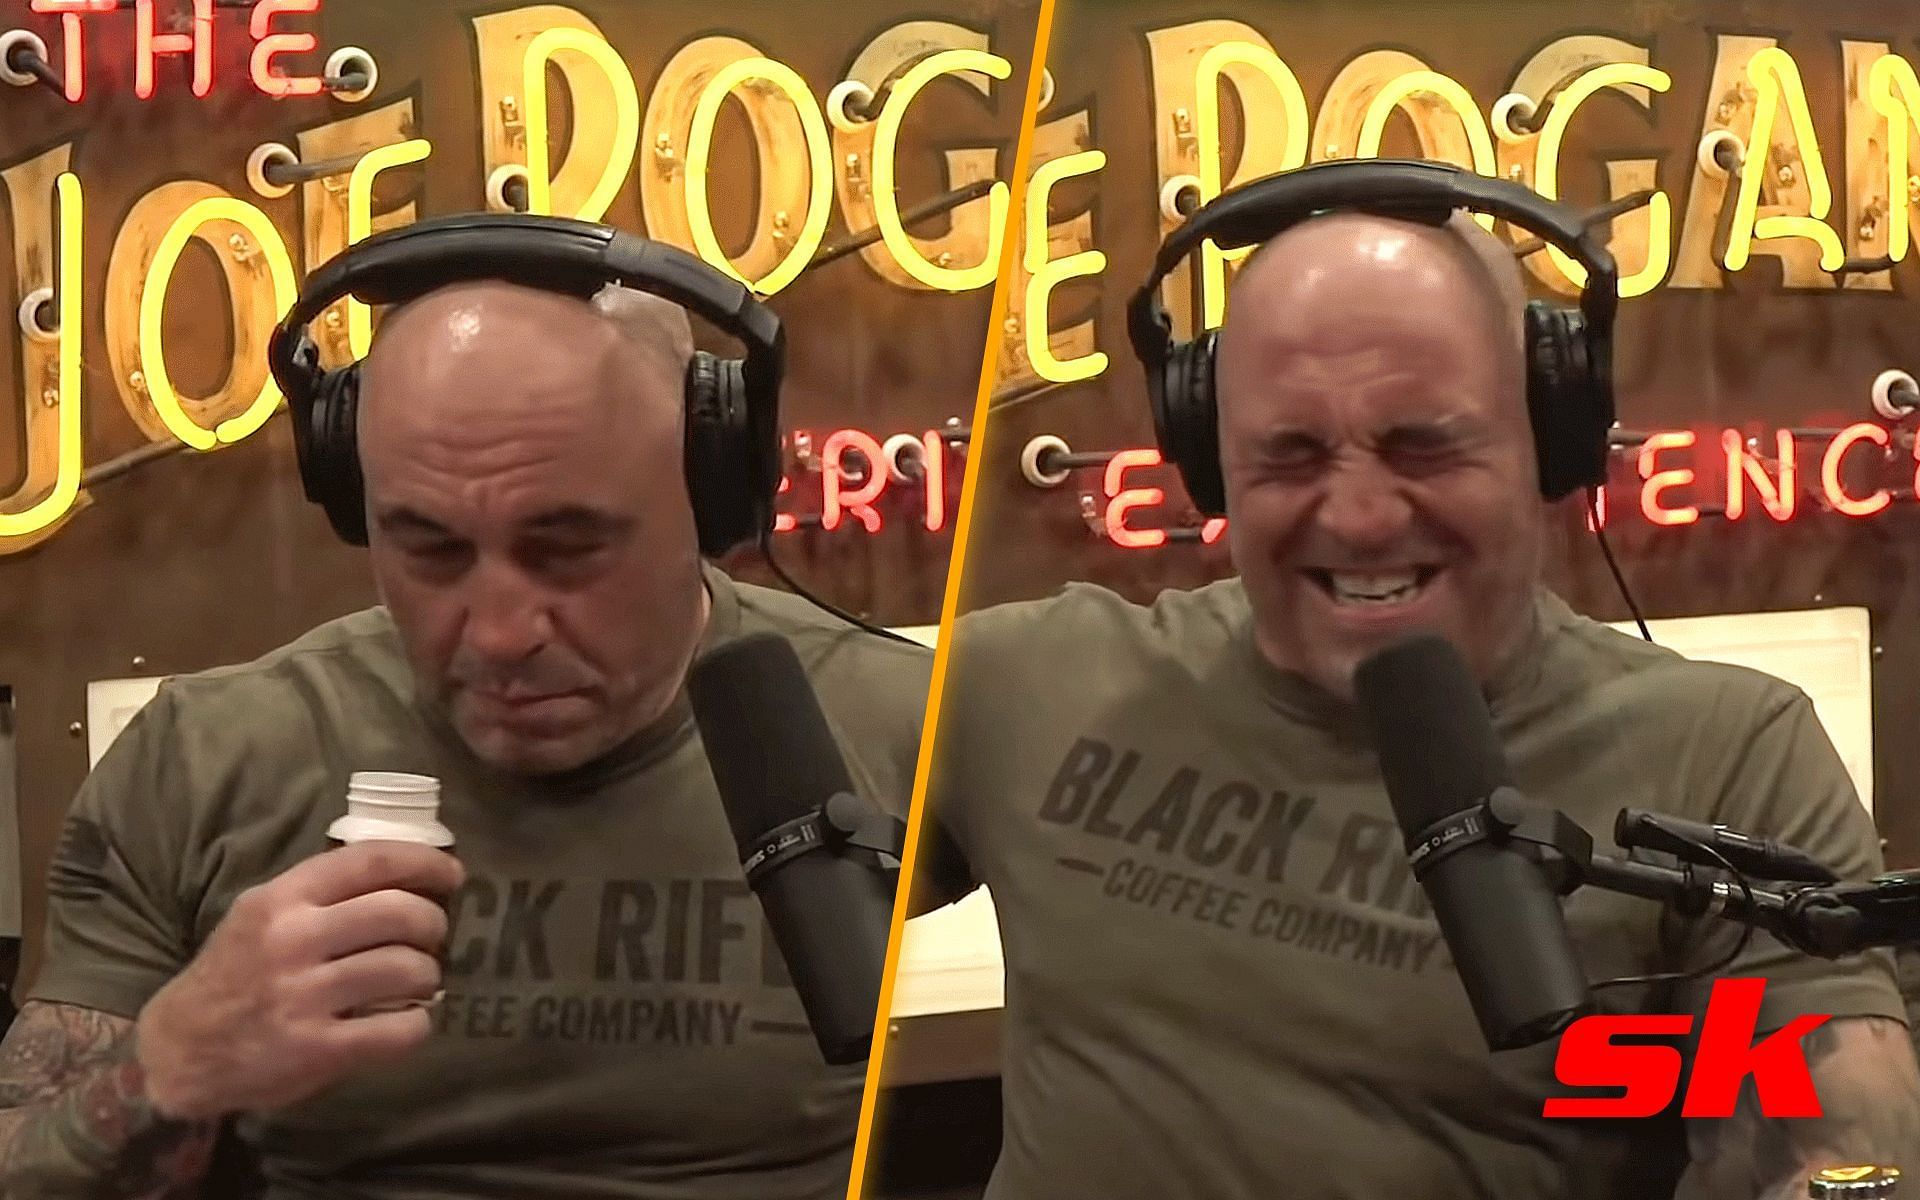 Joe Rogan trying smelling salts for the first time [Image courtesy @Powerful JRE YouTube]